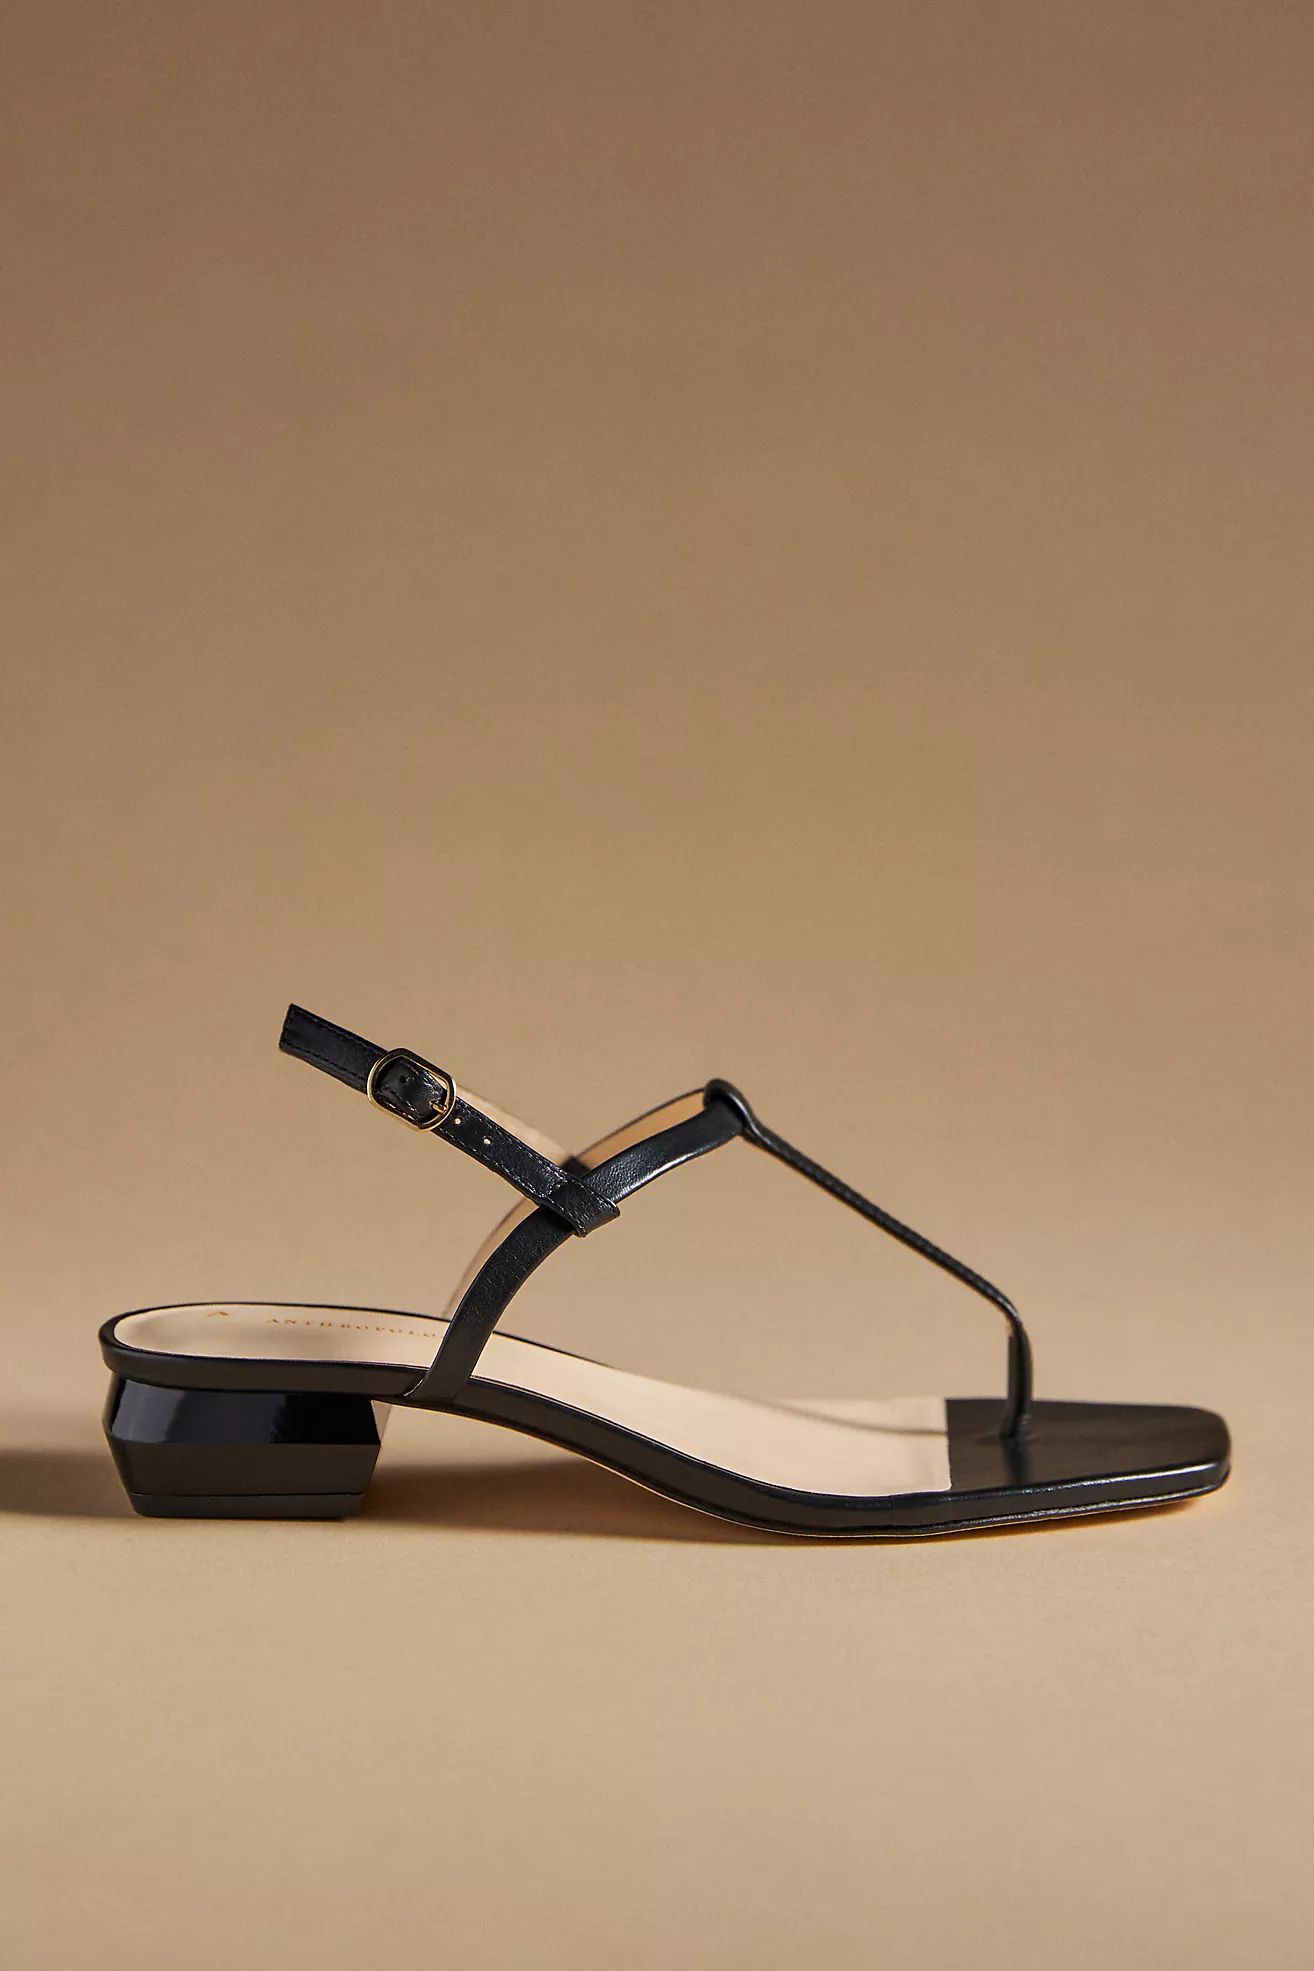 By Anthropologie Strappy Thong Sandals | Anthropologie (US)